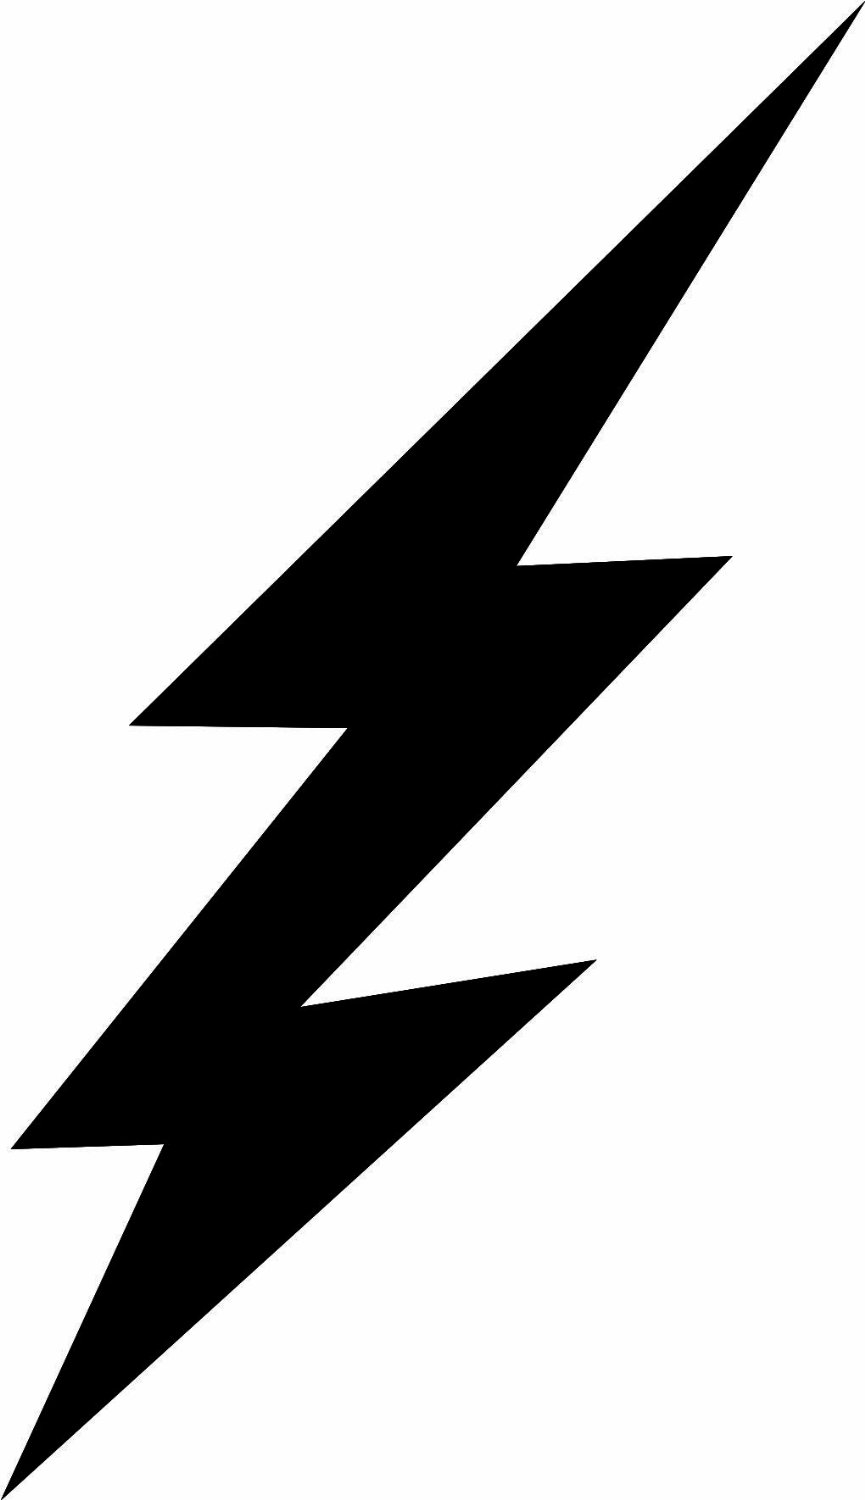 Lightning Bolts Images - Cliparts.co